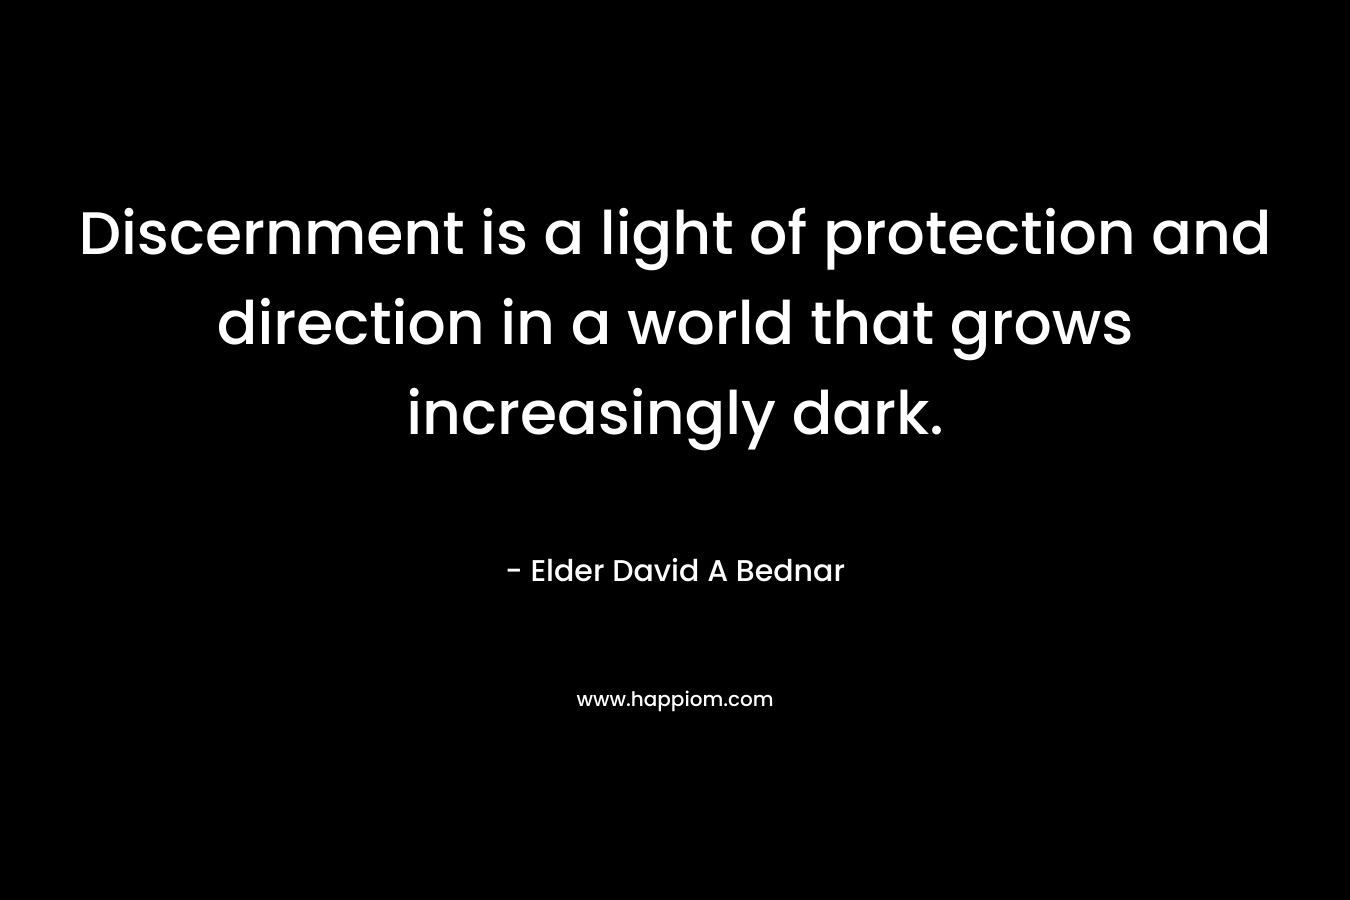 Discernment is a light of protection and direction in a world that grows increasingly dark. – Elder David A Bednar